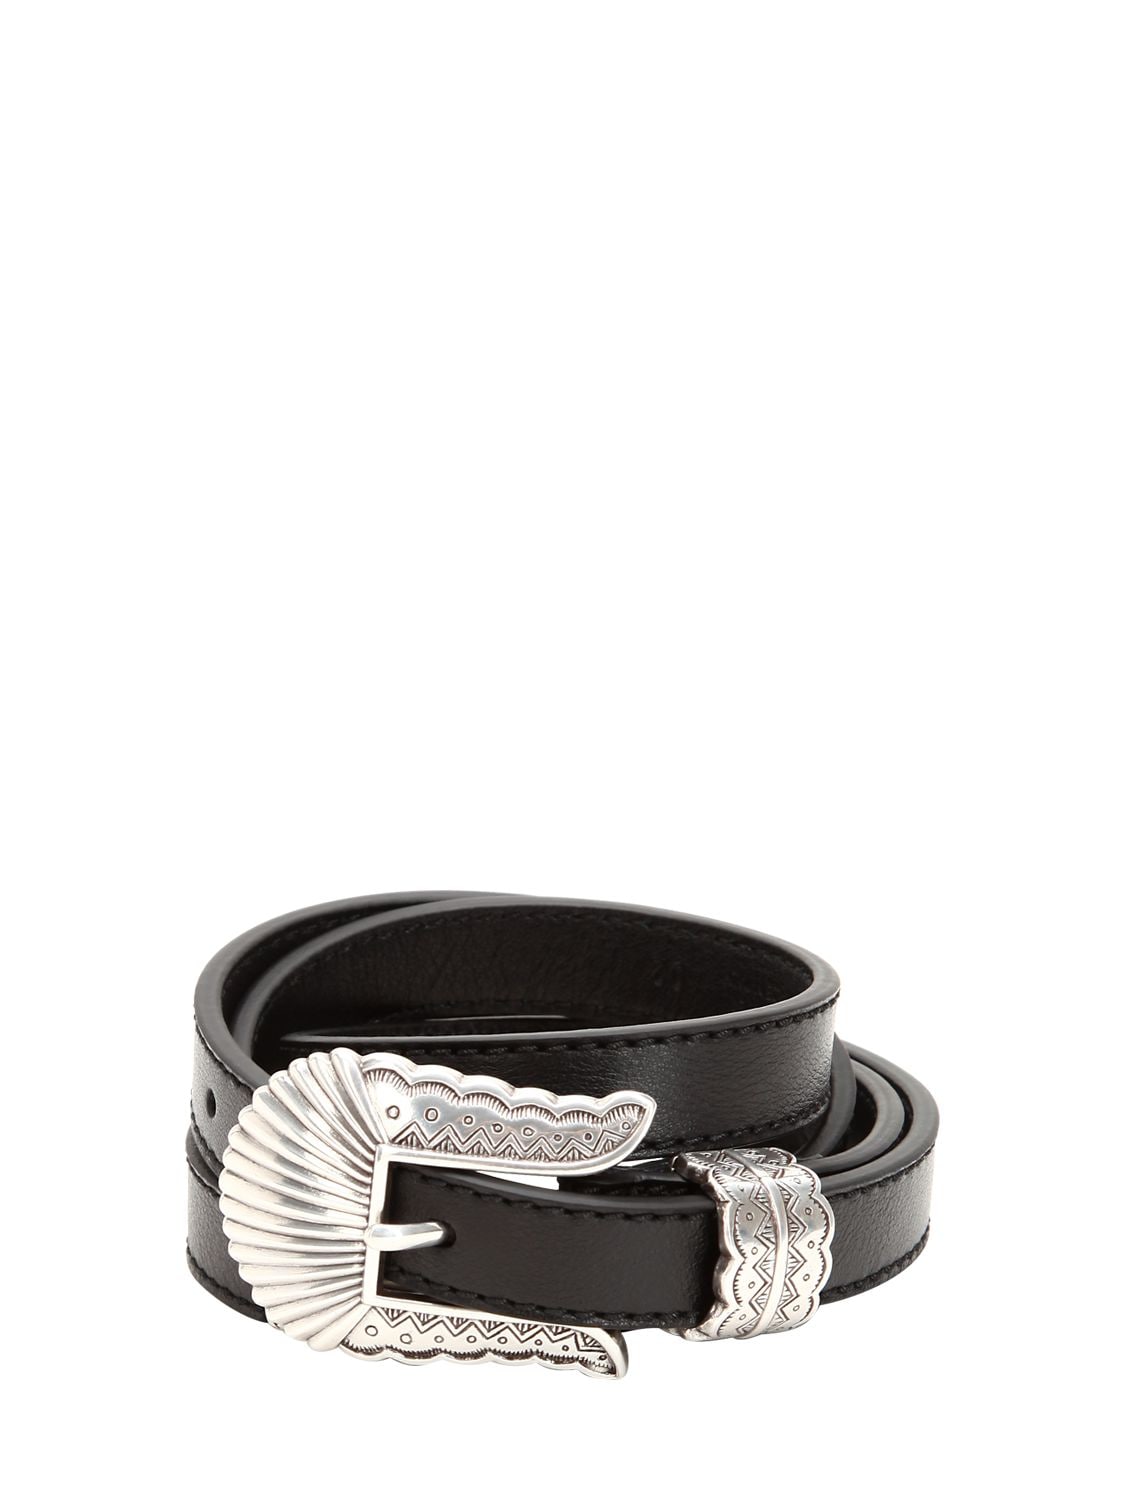 Kate Cate 19mm Thin Kim Nappa Leather Belt In Black